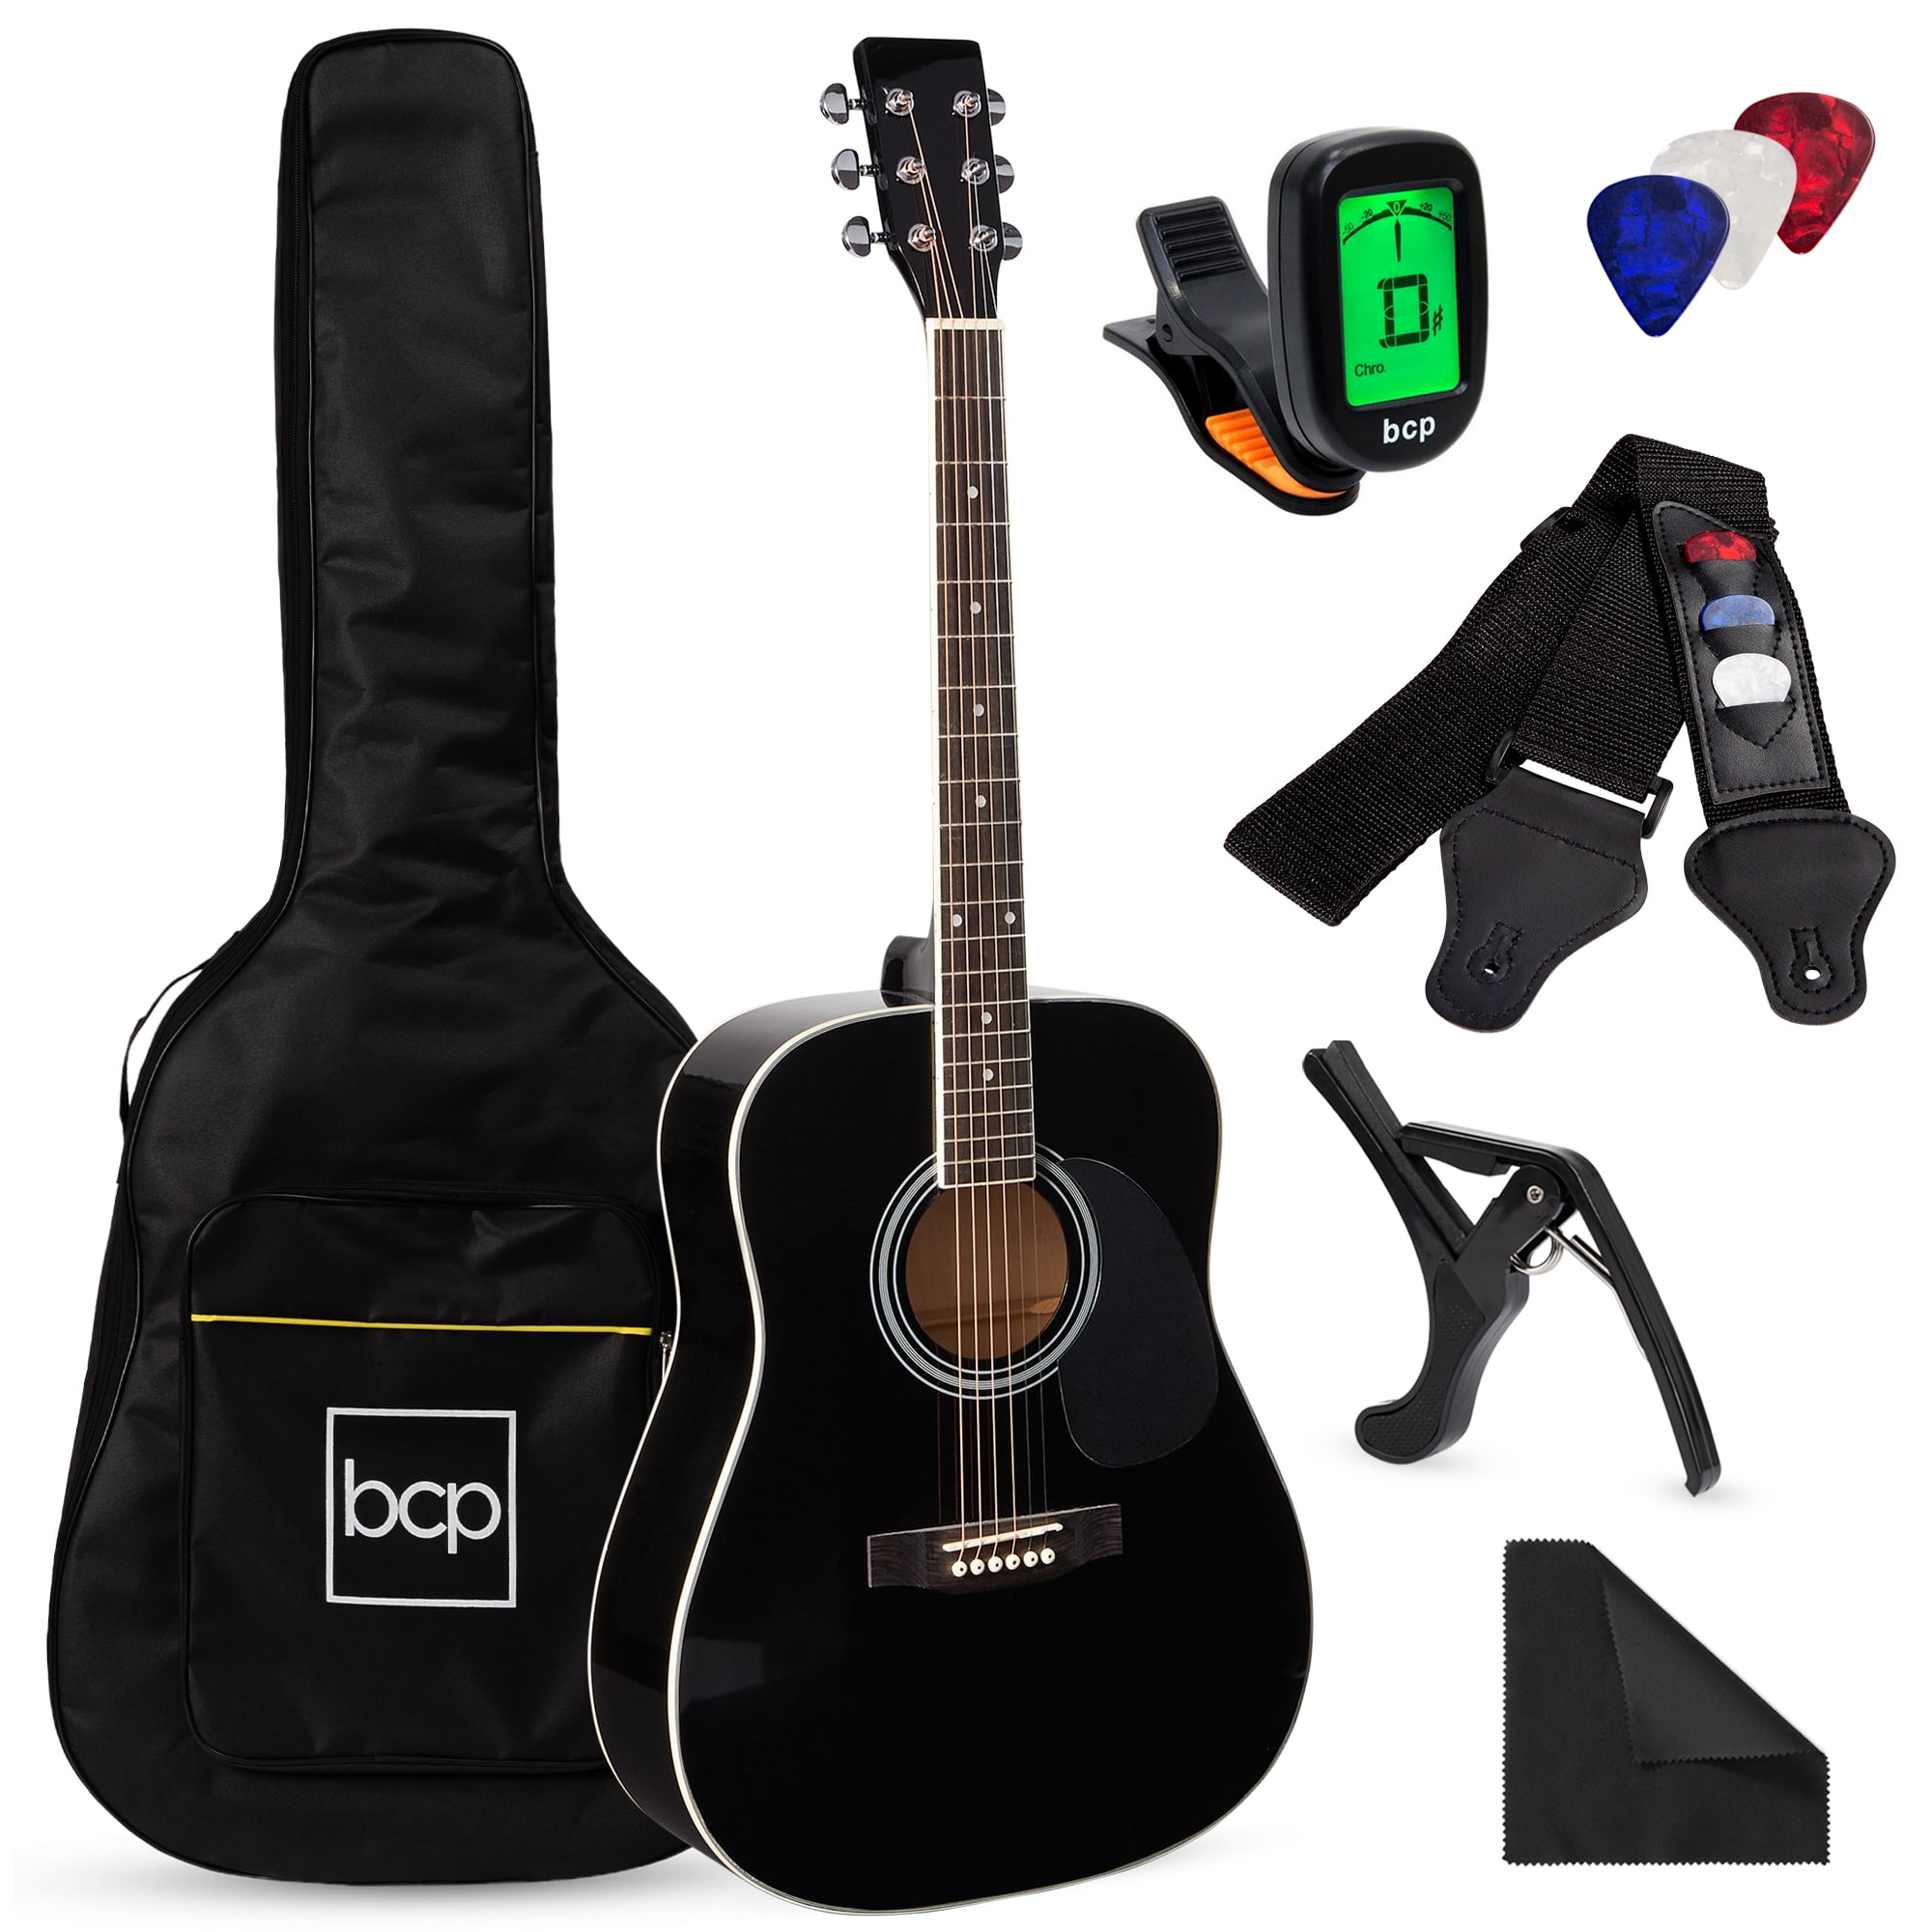 Best Choice Products 41in Full Size All-Wood Acoustic Guitar Starter Kit w/Gig Bag, E-Tuner, Pick, Strap, Rag - Black